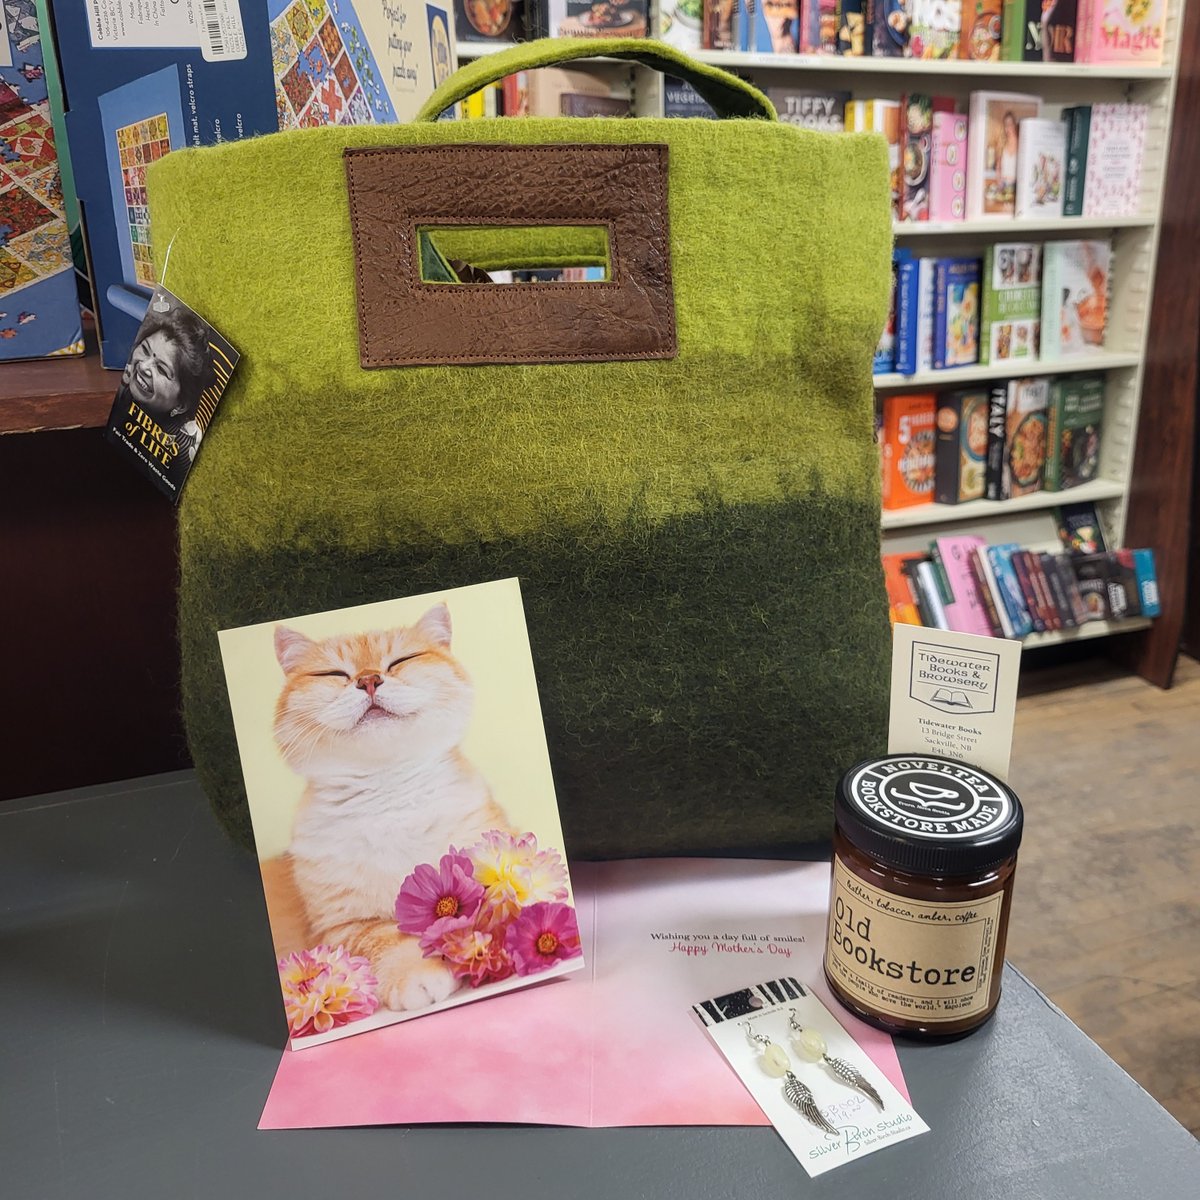 This Mother's Day we are wishing you a day filled with smiles .... and a tote filled with books!!!

Visit us in person or online at tidewaterbooks.ca! 💕🇨🇦📚

#ShopSmall #ShopLocal #ShopNB #ShopIndie  #BookLovers #IndieBookstores #Fallinlovewithlocal #SmallBusinessEveryDay